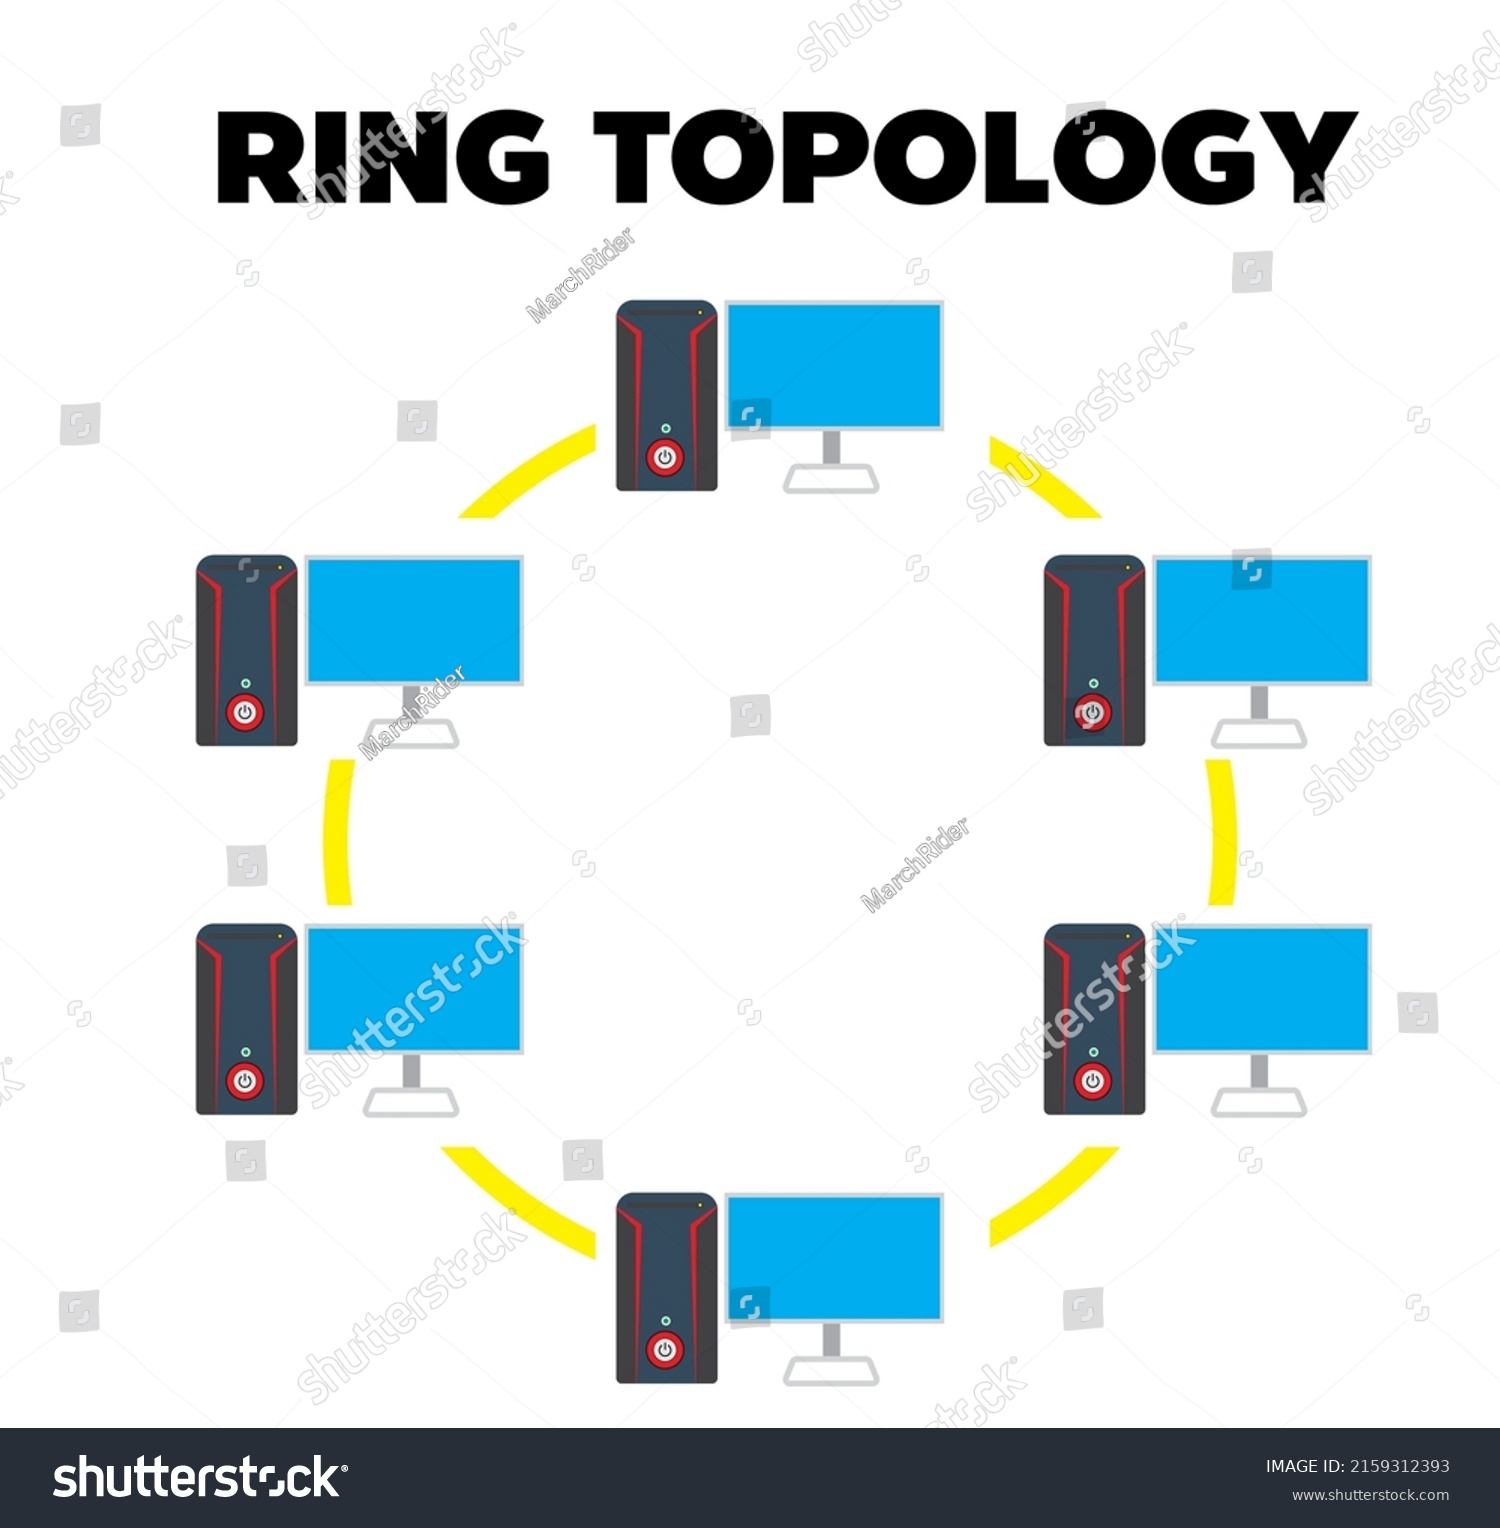 Ring Topology Network Layoutin Ring Network Stock Vector (Royalty Free ...